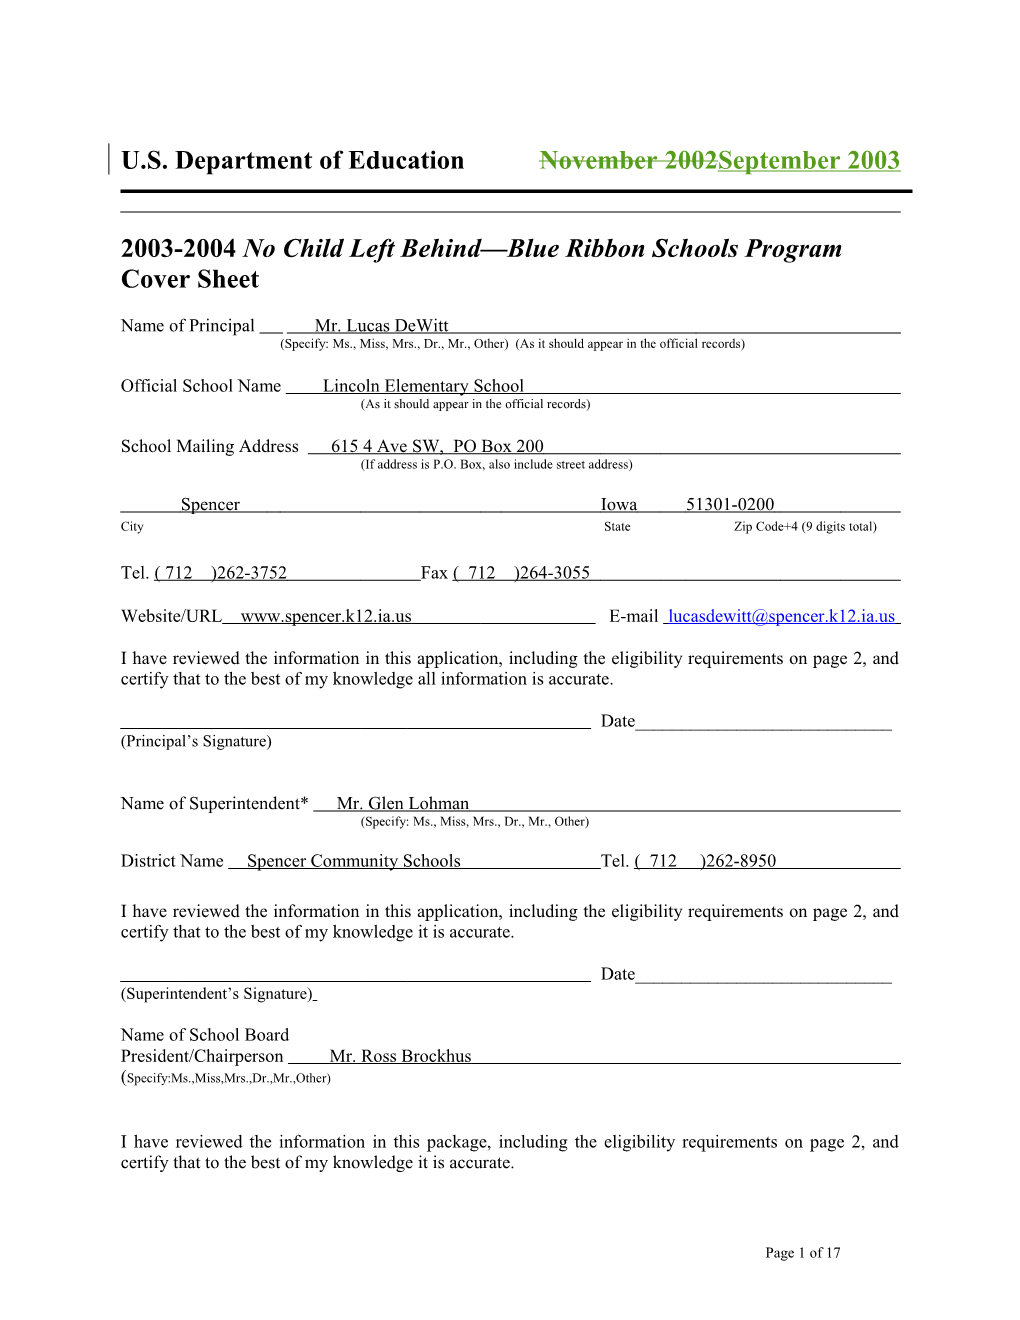 Lincoln Elementary School 2004 No Child Left Behind-Blue Ribbon School Application (Msword) s1